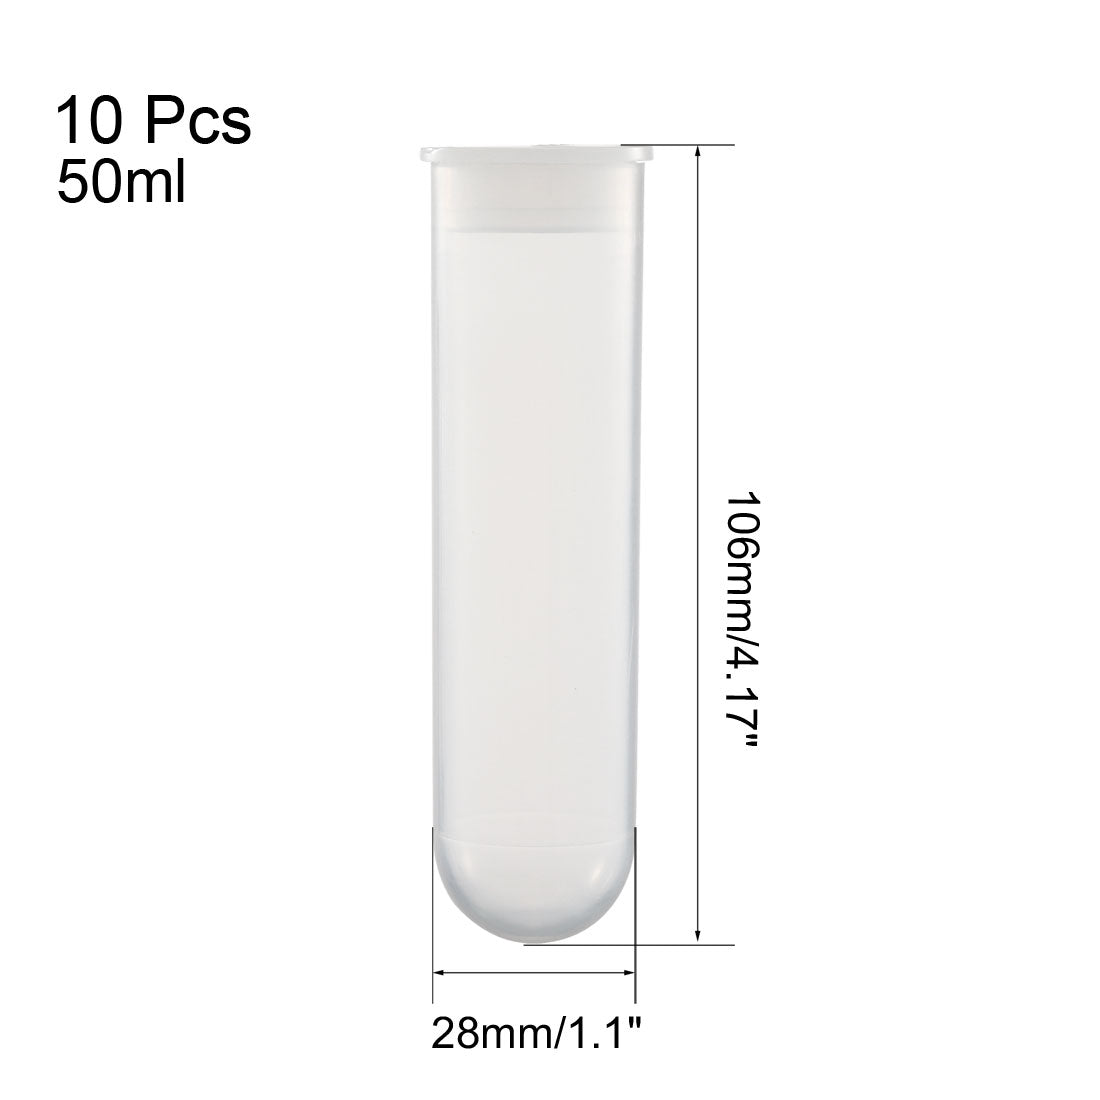 uxcell Uxcell 10 Pcs 50ml Plastic Centrifuge Tubes with Attached Cap, Round Bottom